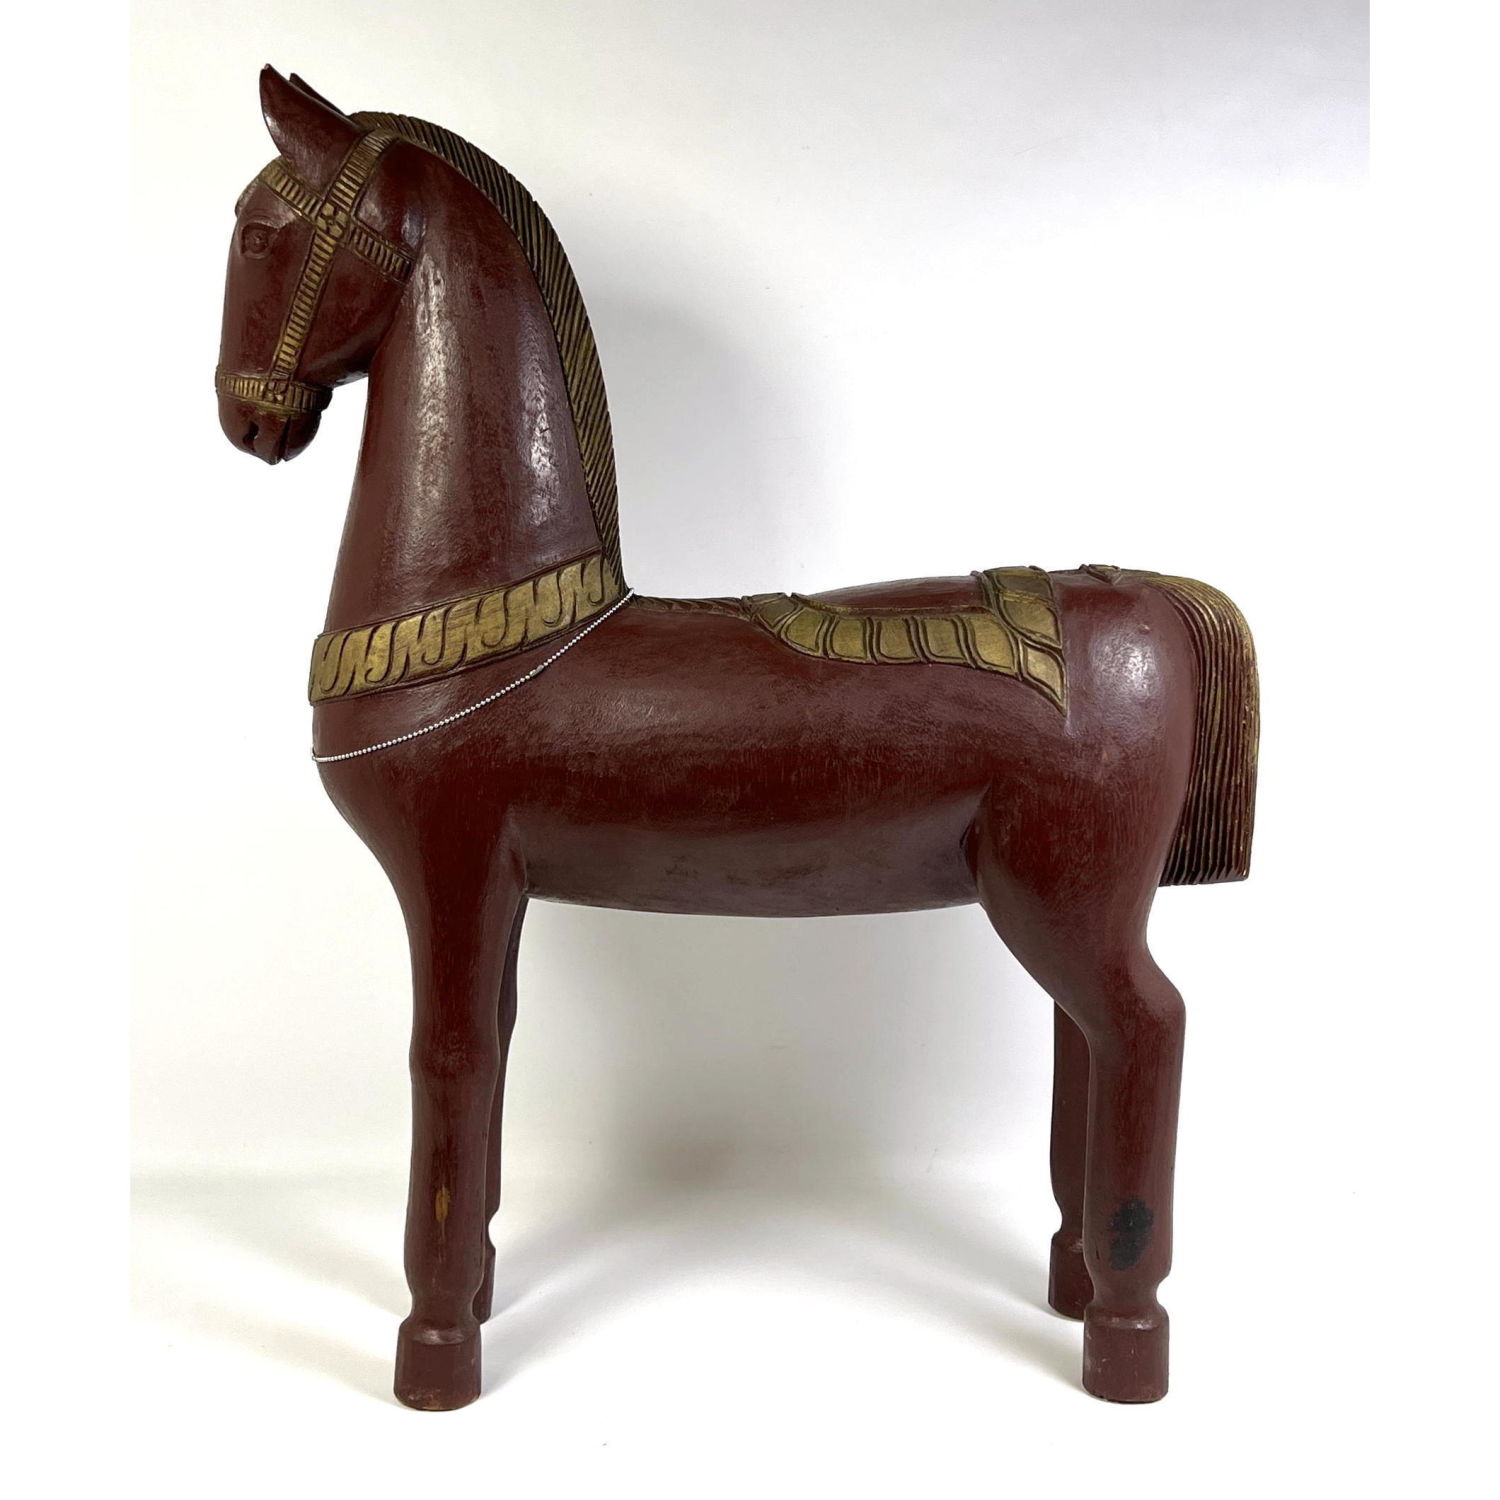 Carved Polychrome Horse Figure